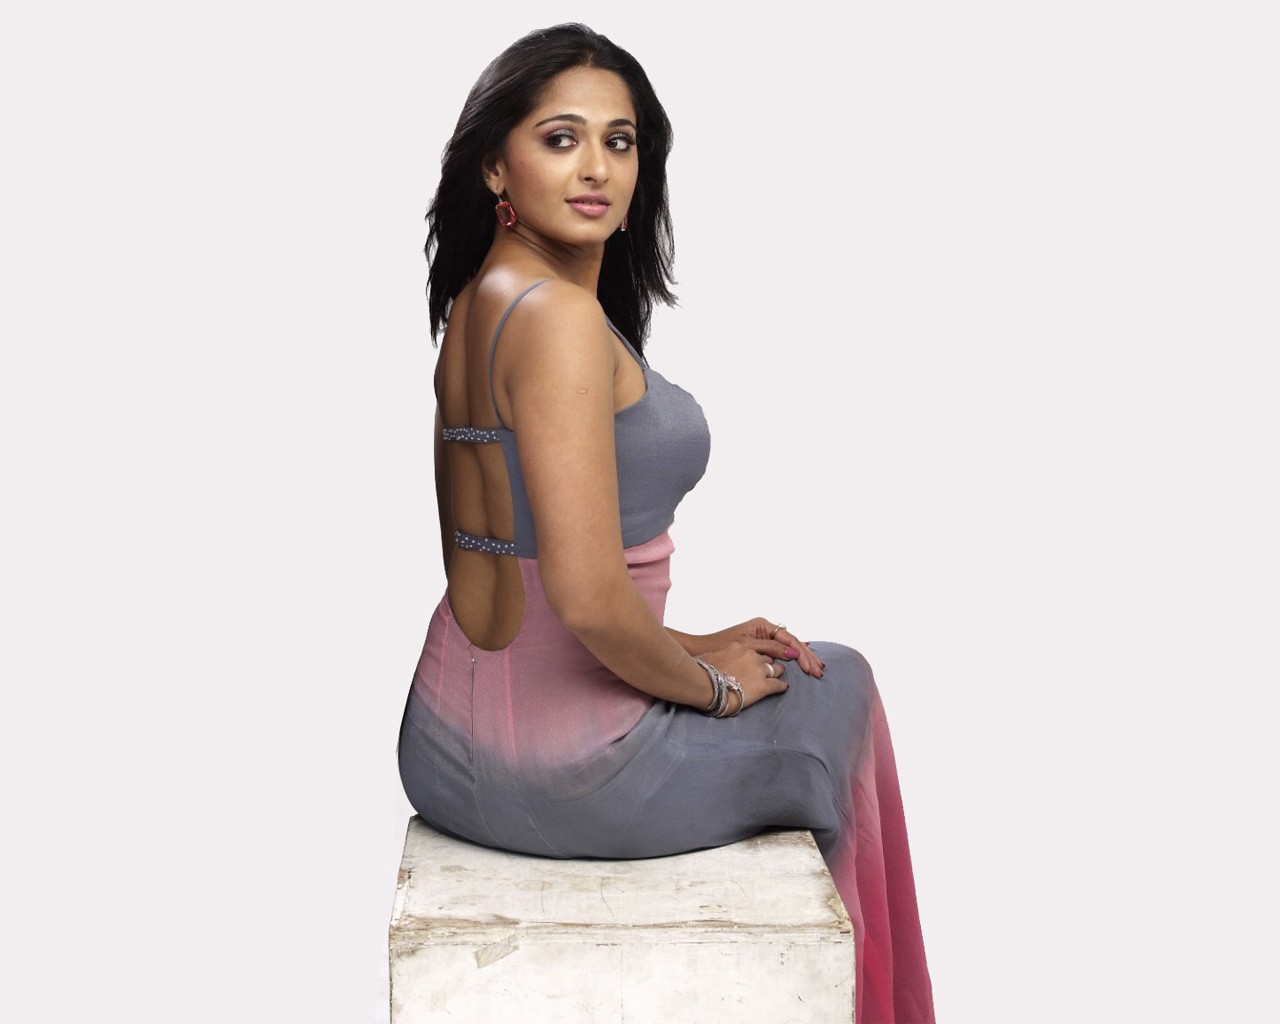 sexy, hot pictures, hot pics, anushka shetty, south indian sexy, mallu hot pictures, videos, smoking hot, telugu, tamil, hottie, bombshell, sex bomb